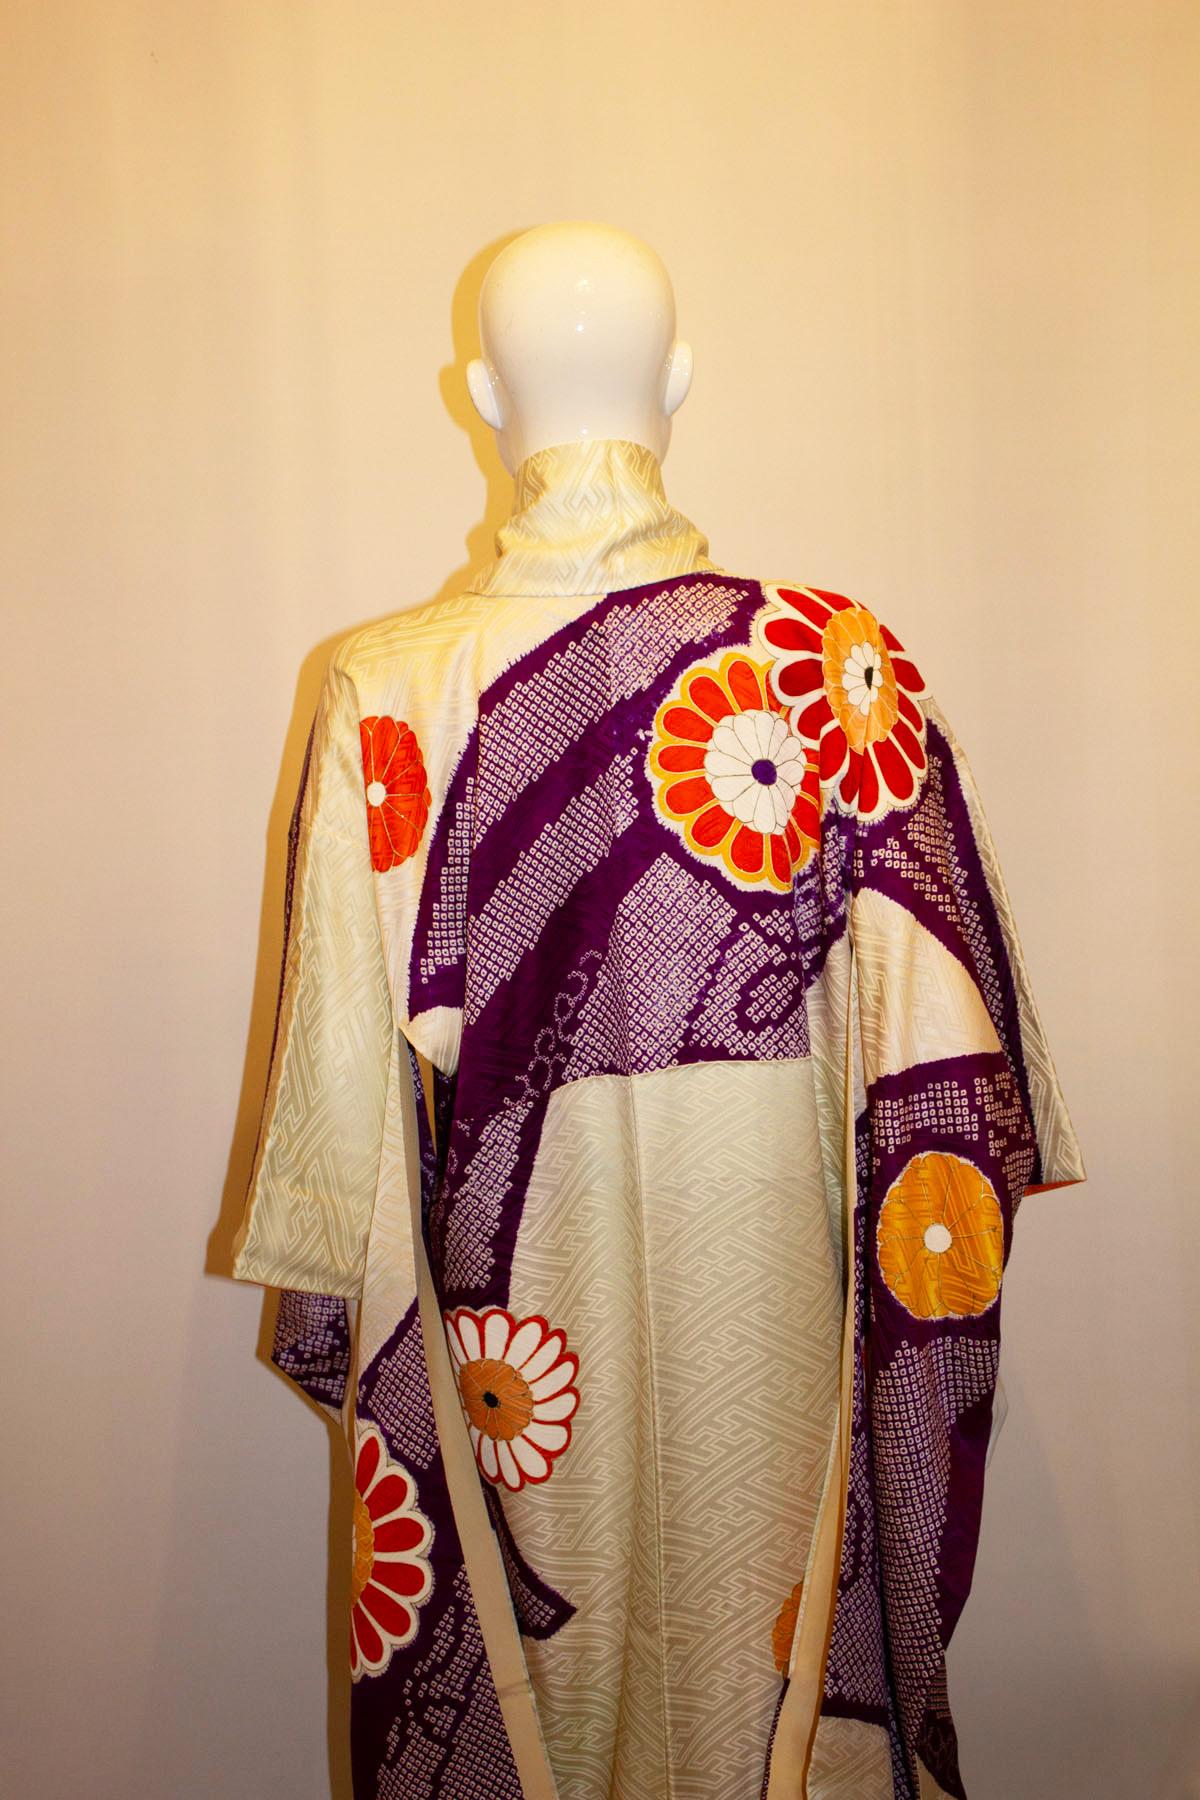 A stunning vintage kimono with orange and purple flower detail. The kimono has an orange band at the base, and gold detail around the flower petals.
Measurements: Bust up to 48'', length 62''